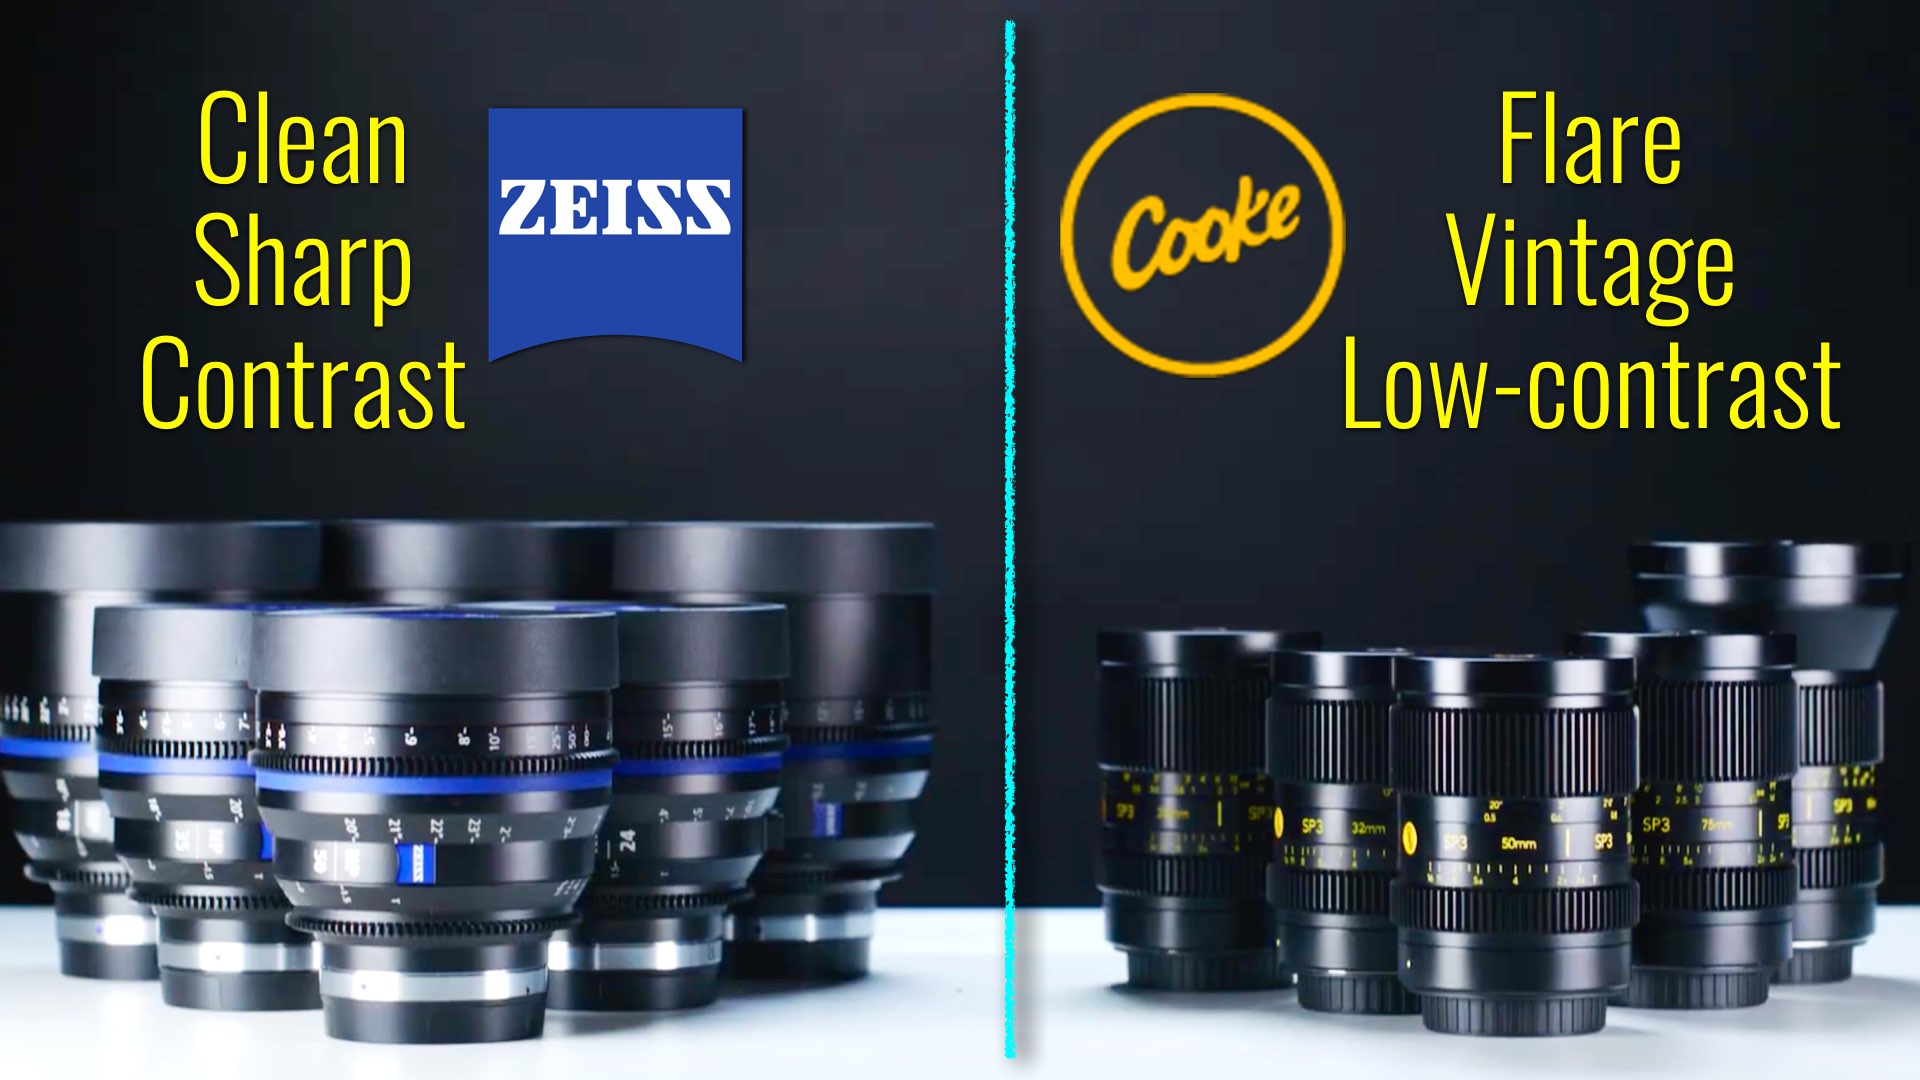 Cooke SP3 vs. Zeiss Nano Primes: Which is Better?